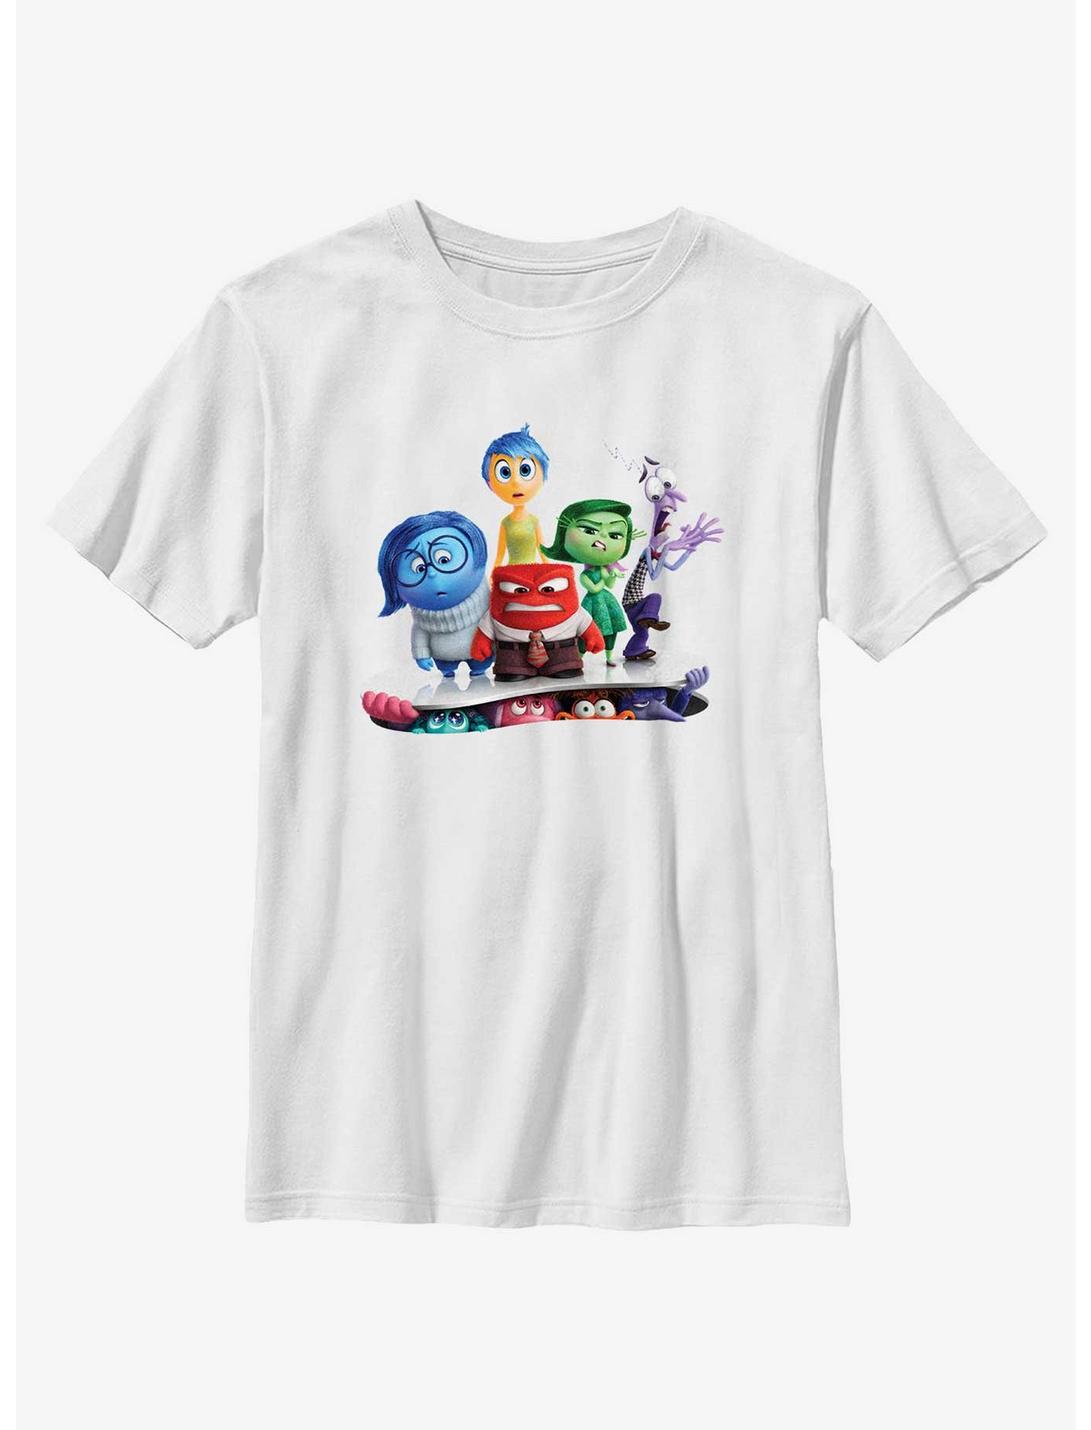 Disney Pixar Inside Out 2 New Emotions Youth T-Shirt, WHITE, hi-res